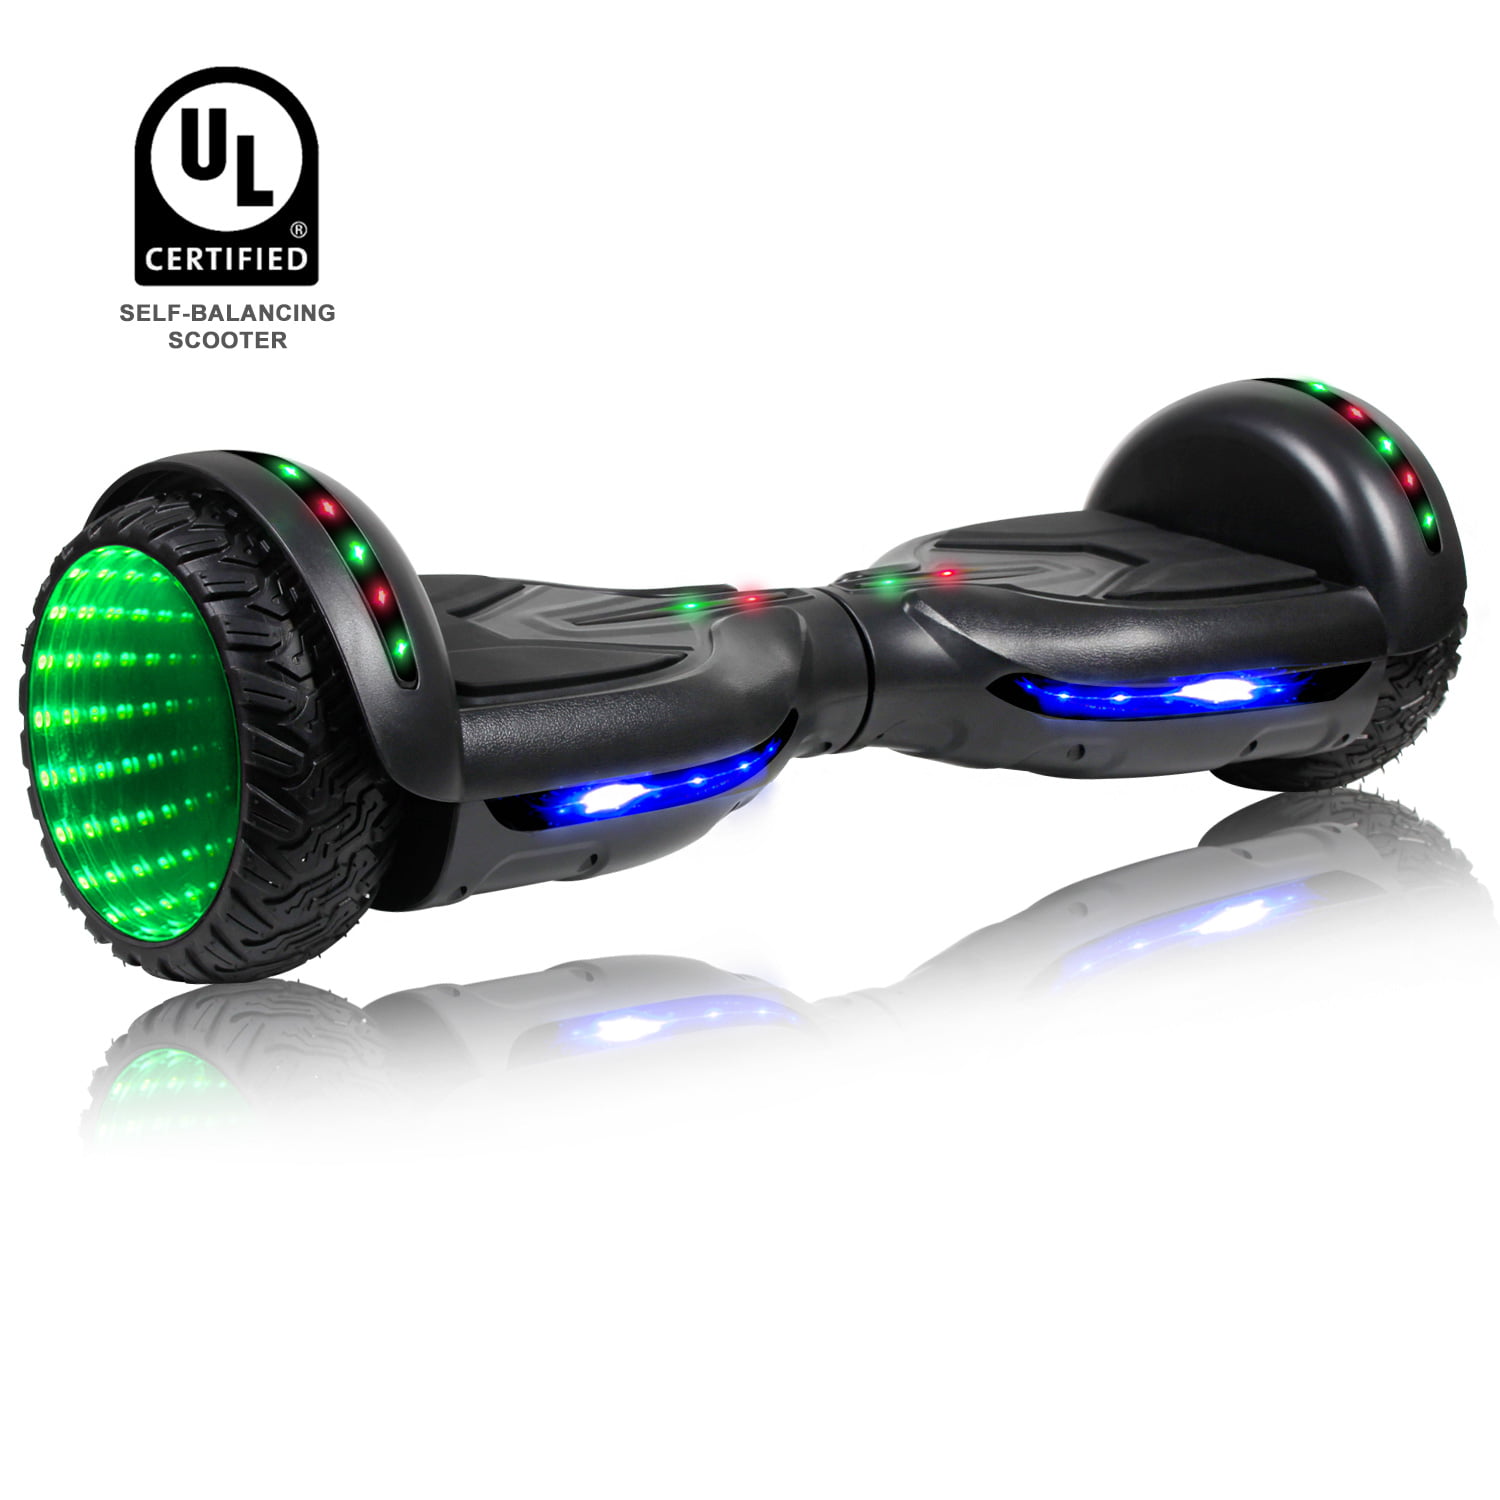 UL 2272 Certified Hover Board 6.5 Electric Self Balancing Scooter CBD Hoverboard for Kids Hoverboard with Bluetooth Speaker and LED Lights for Adults 